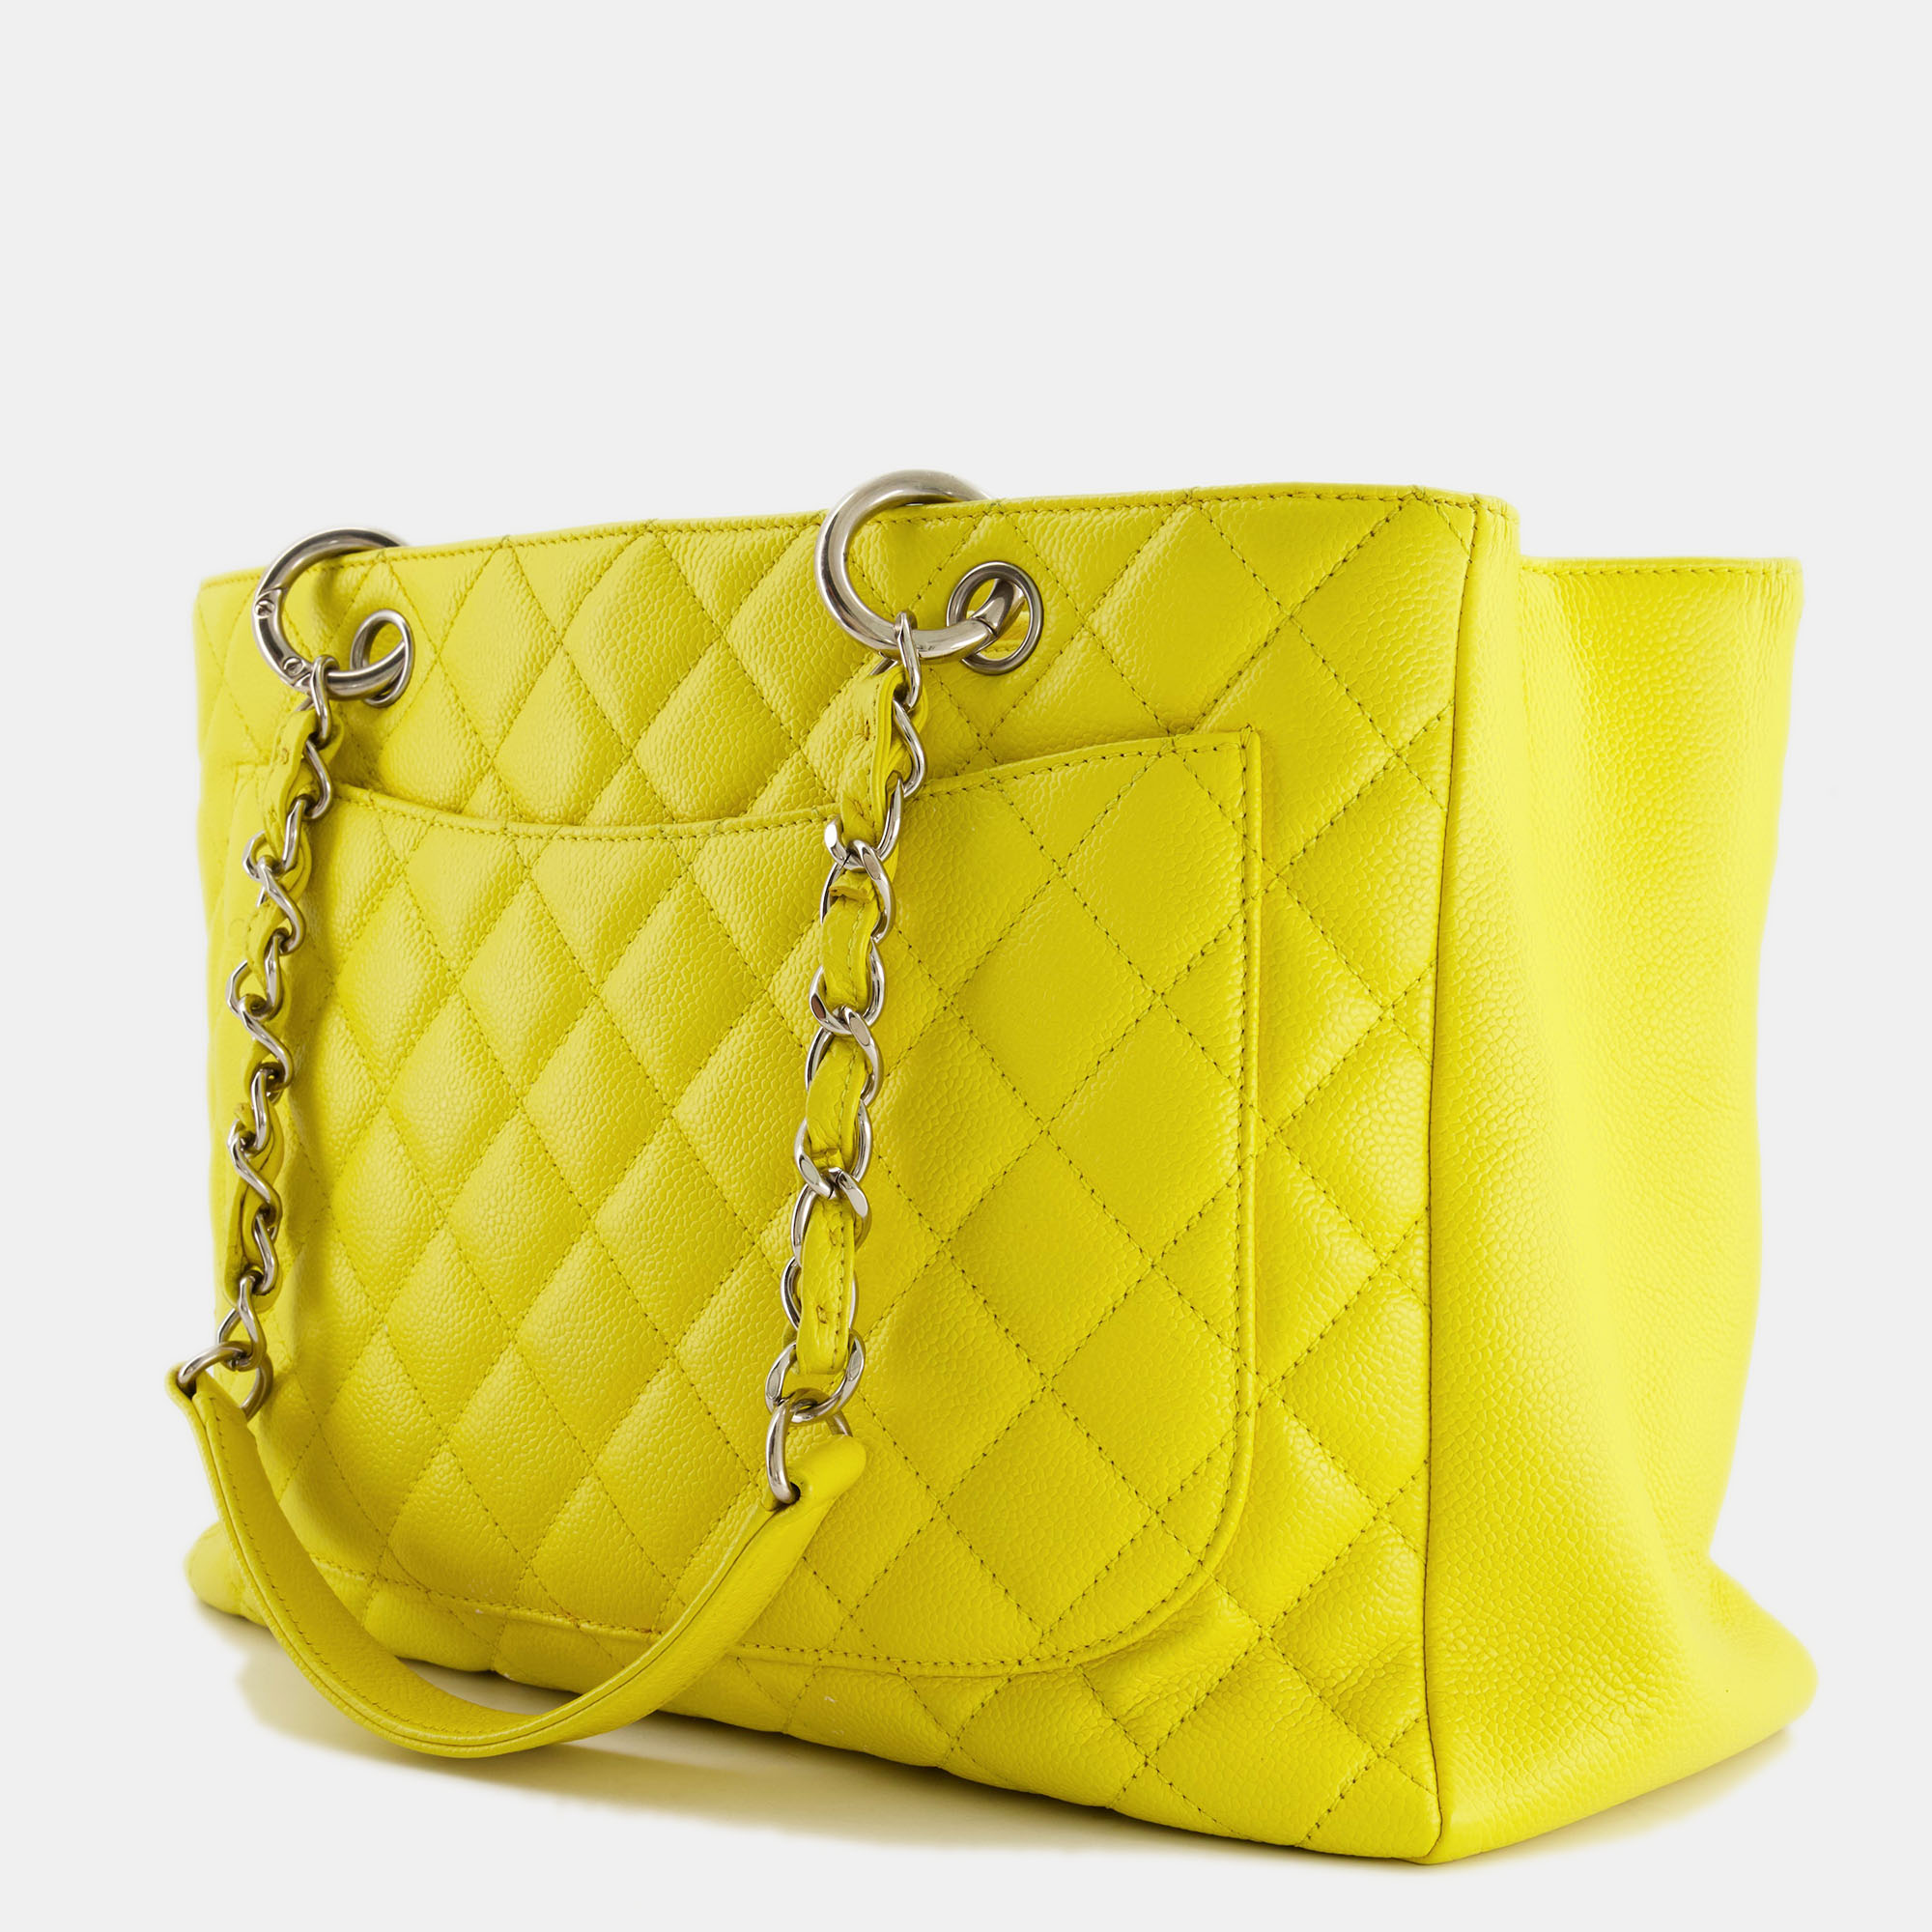 Chanel Canary Yellow GST Grand Shopper Tote Bag In Caviar Leather With Silver Hardware